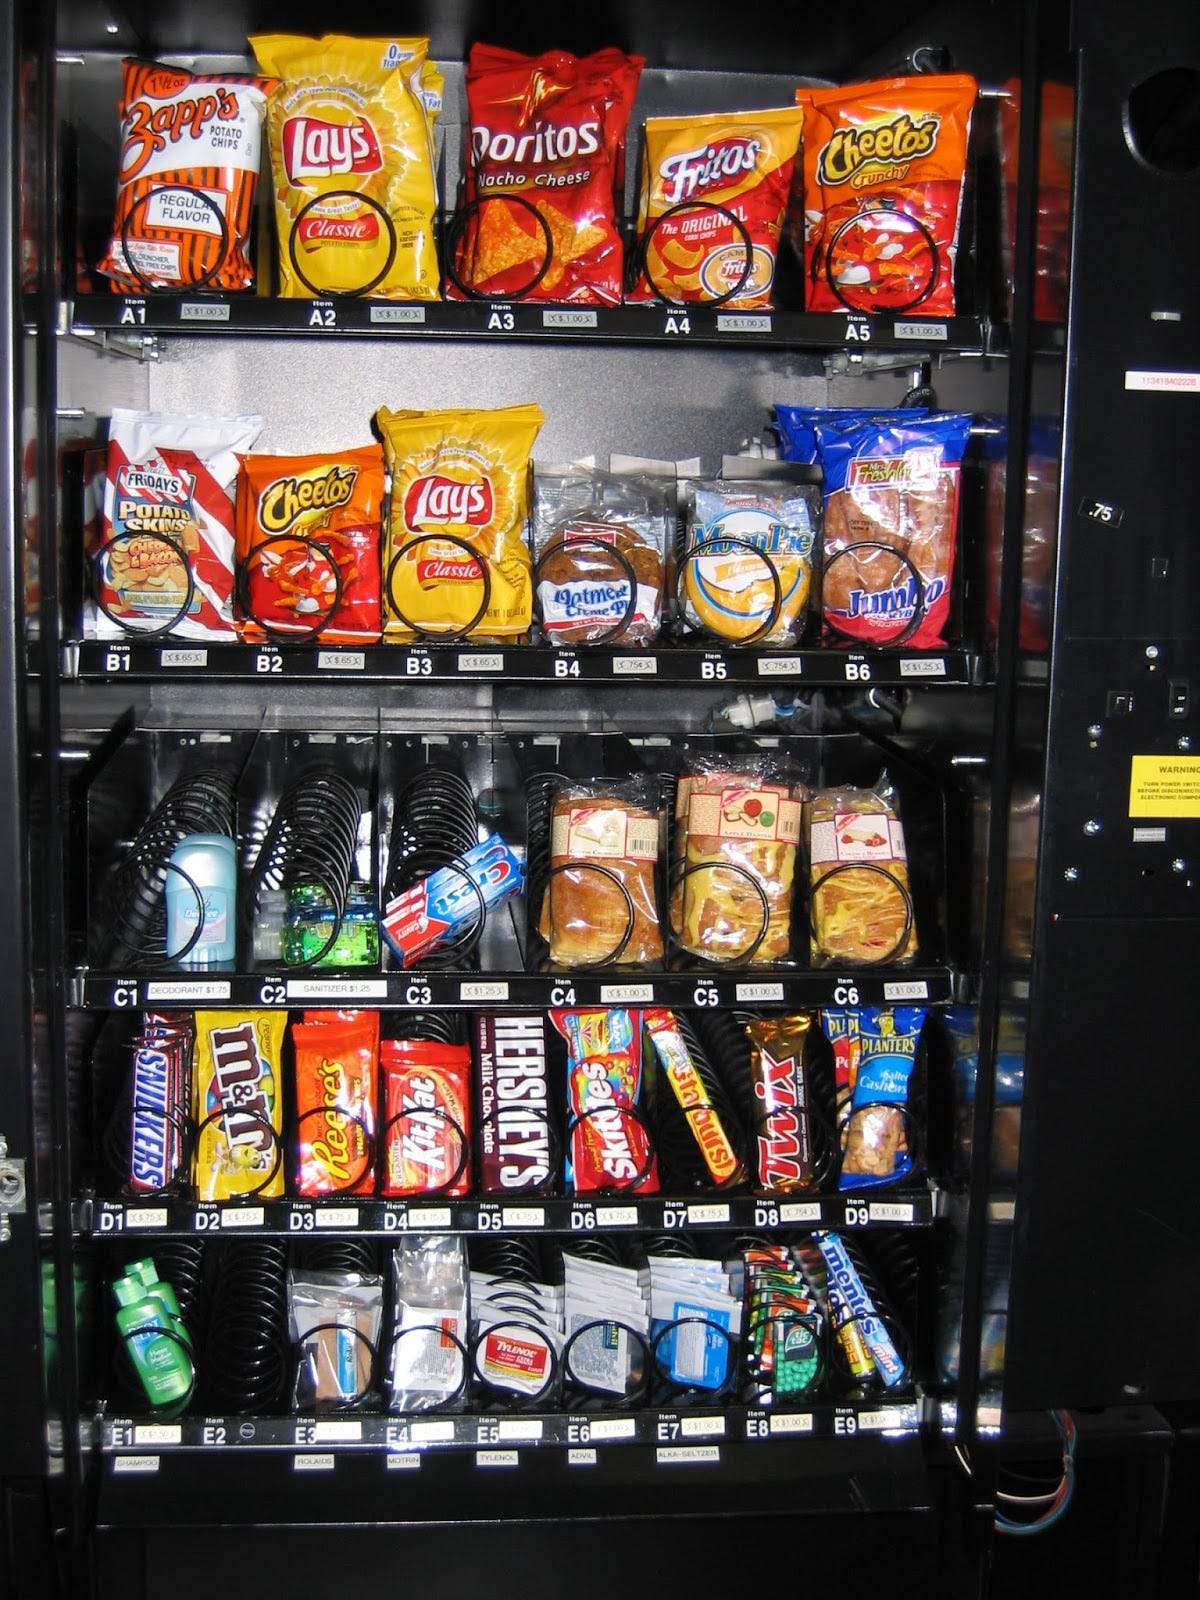 Design Vending Machine in java. This is one of the good java